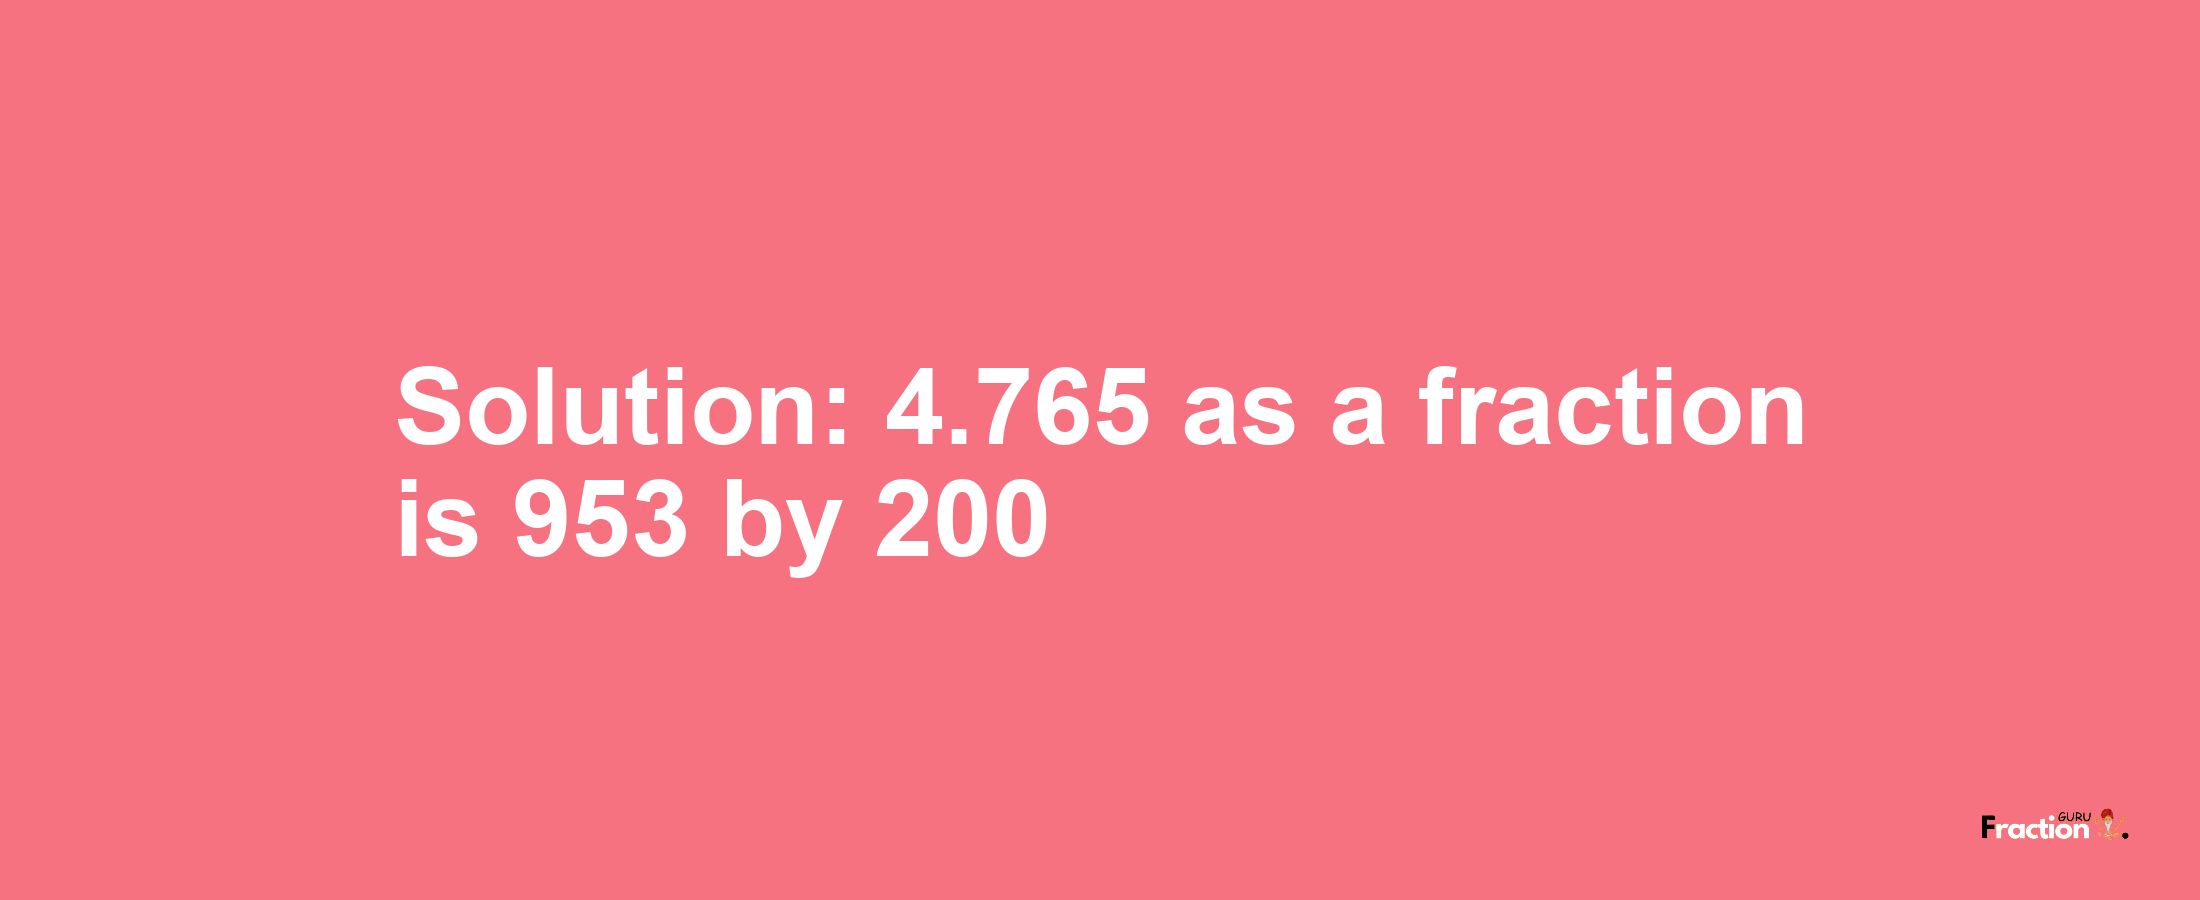 Solution:4.765 as a fraction is 953/200